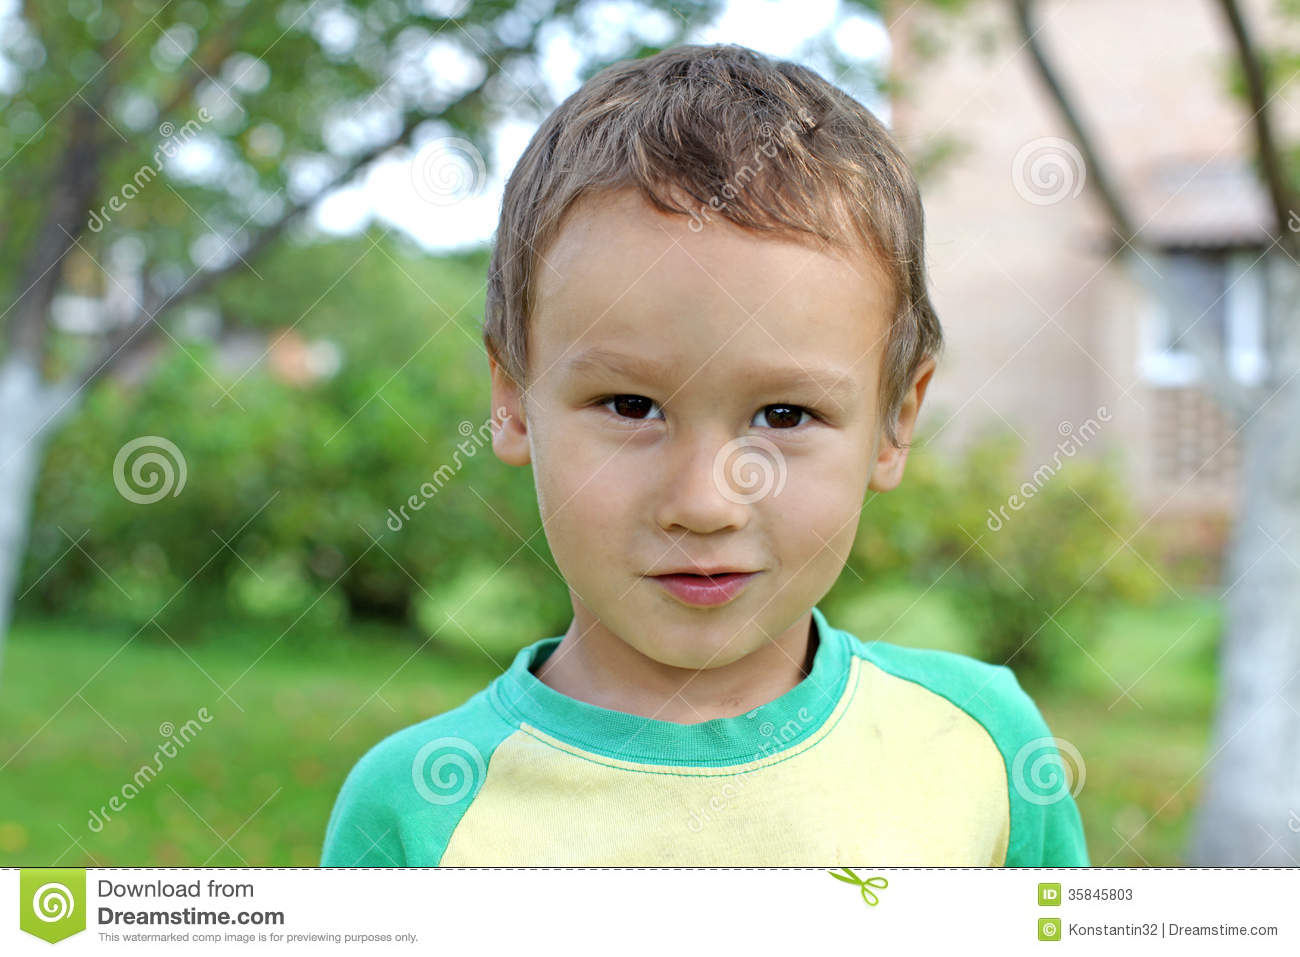 Funny Little Boy 3 4 Year Old Outdoors Stock Photos   Image  35845803